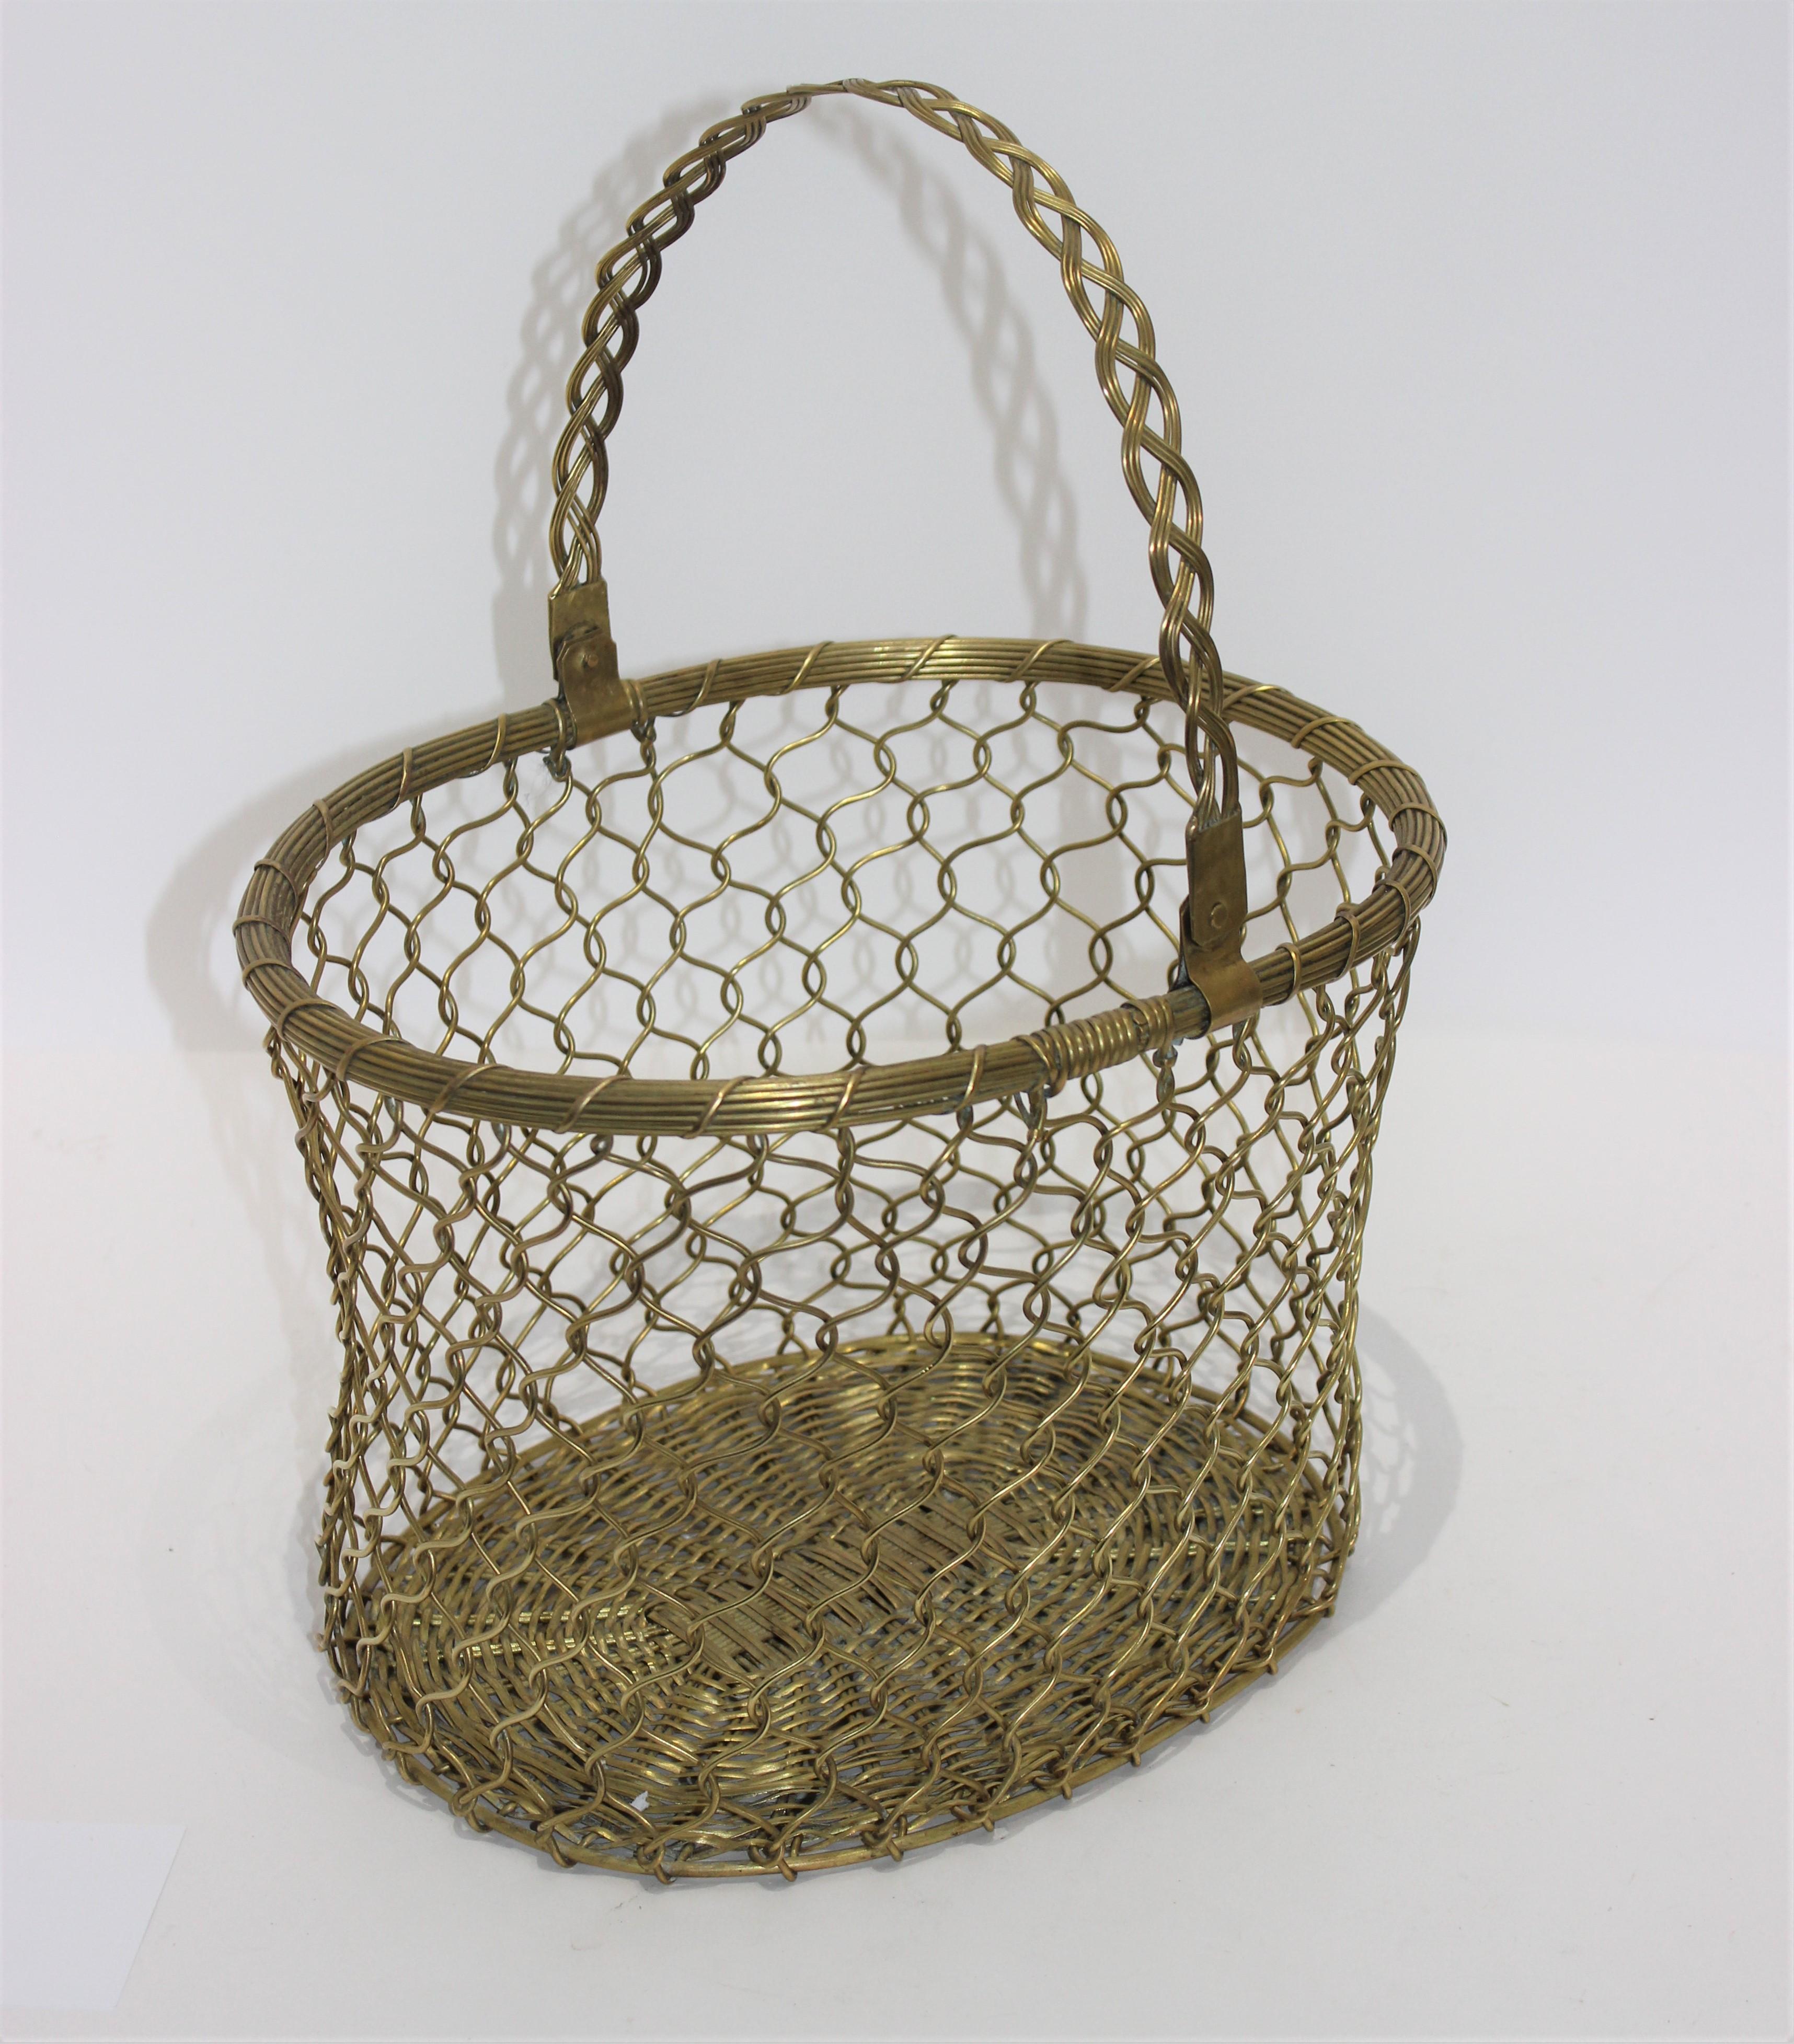 French country woven brass basket mid-20th century from a Palm Beach estate

Professionally polished.